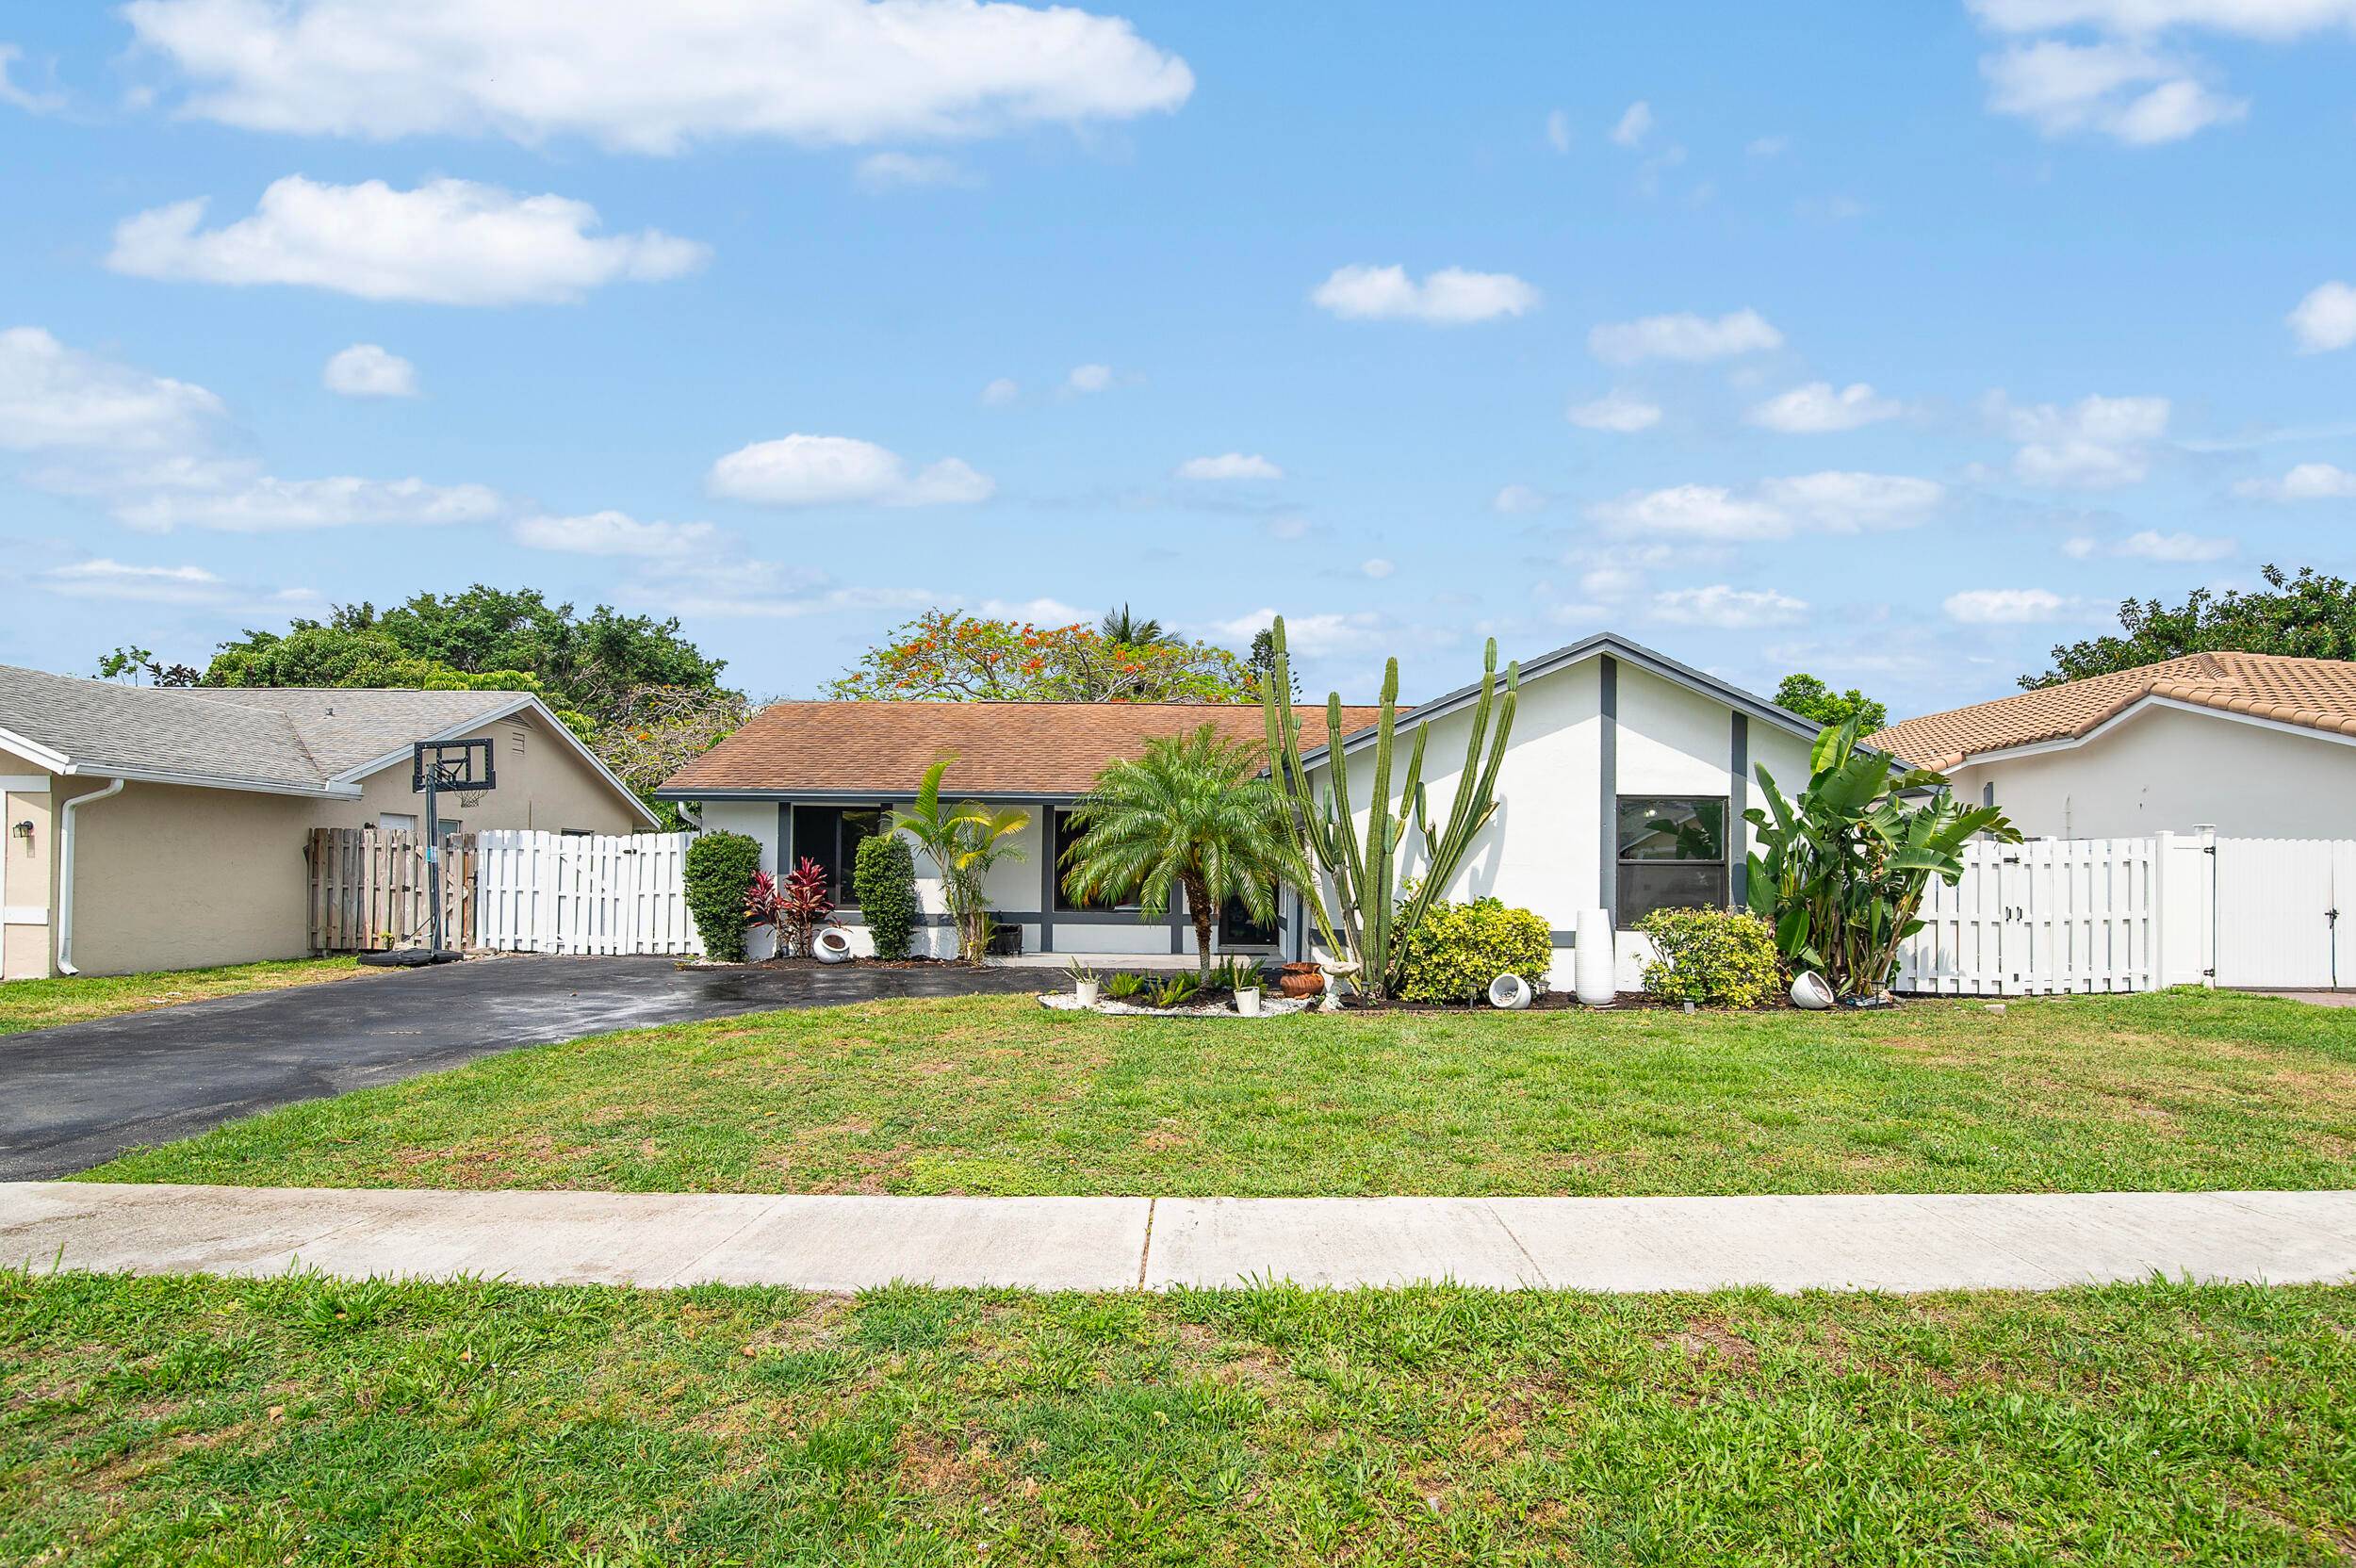 Stunning lakefront home with minimal HOA fees awaits !